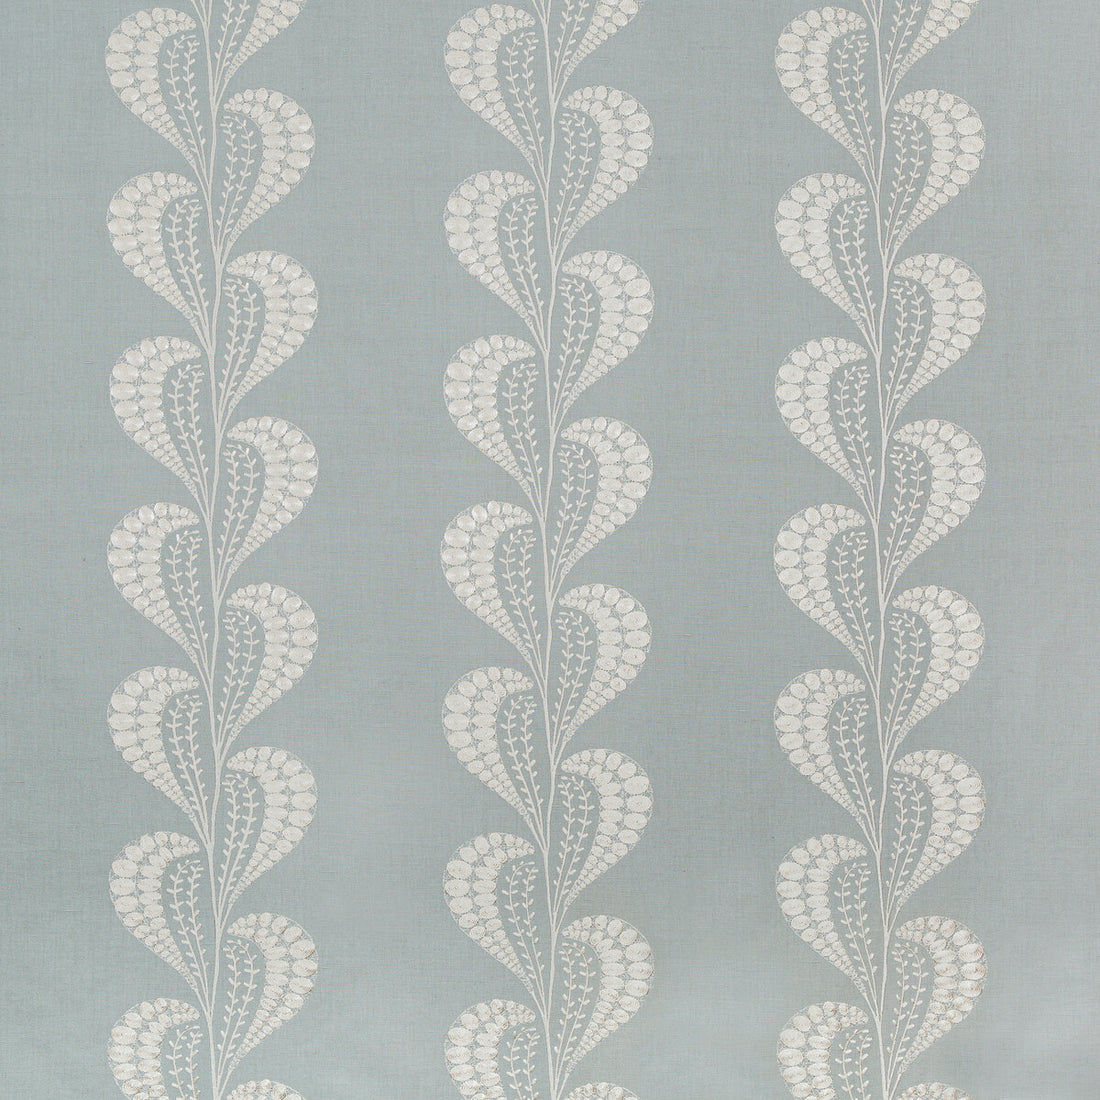 Tisza fabric in chambray color - pattern 4787.15.0 - by Kravet Couture in the Windsor Smith Naila collection